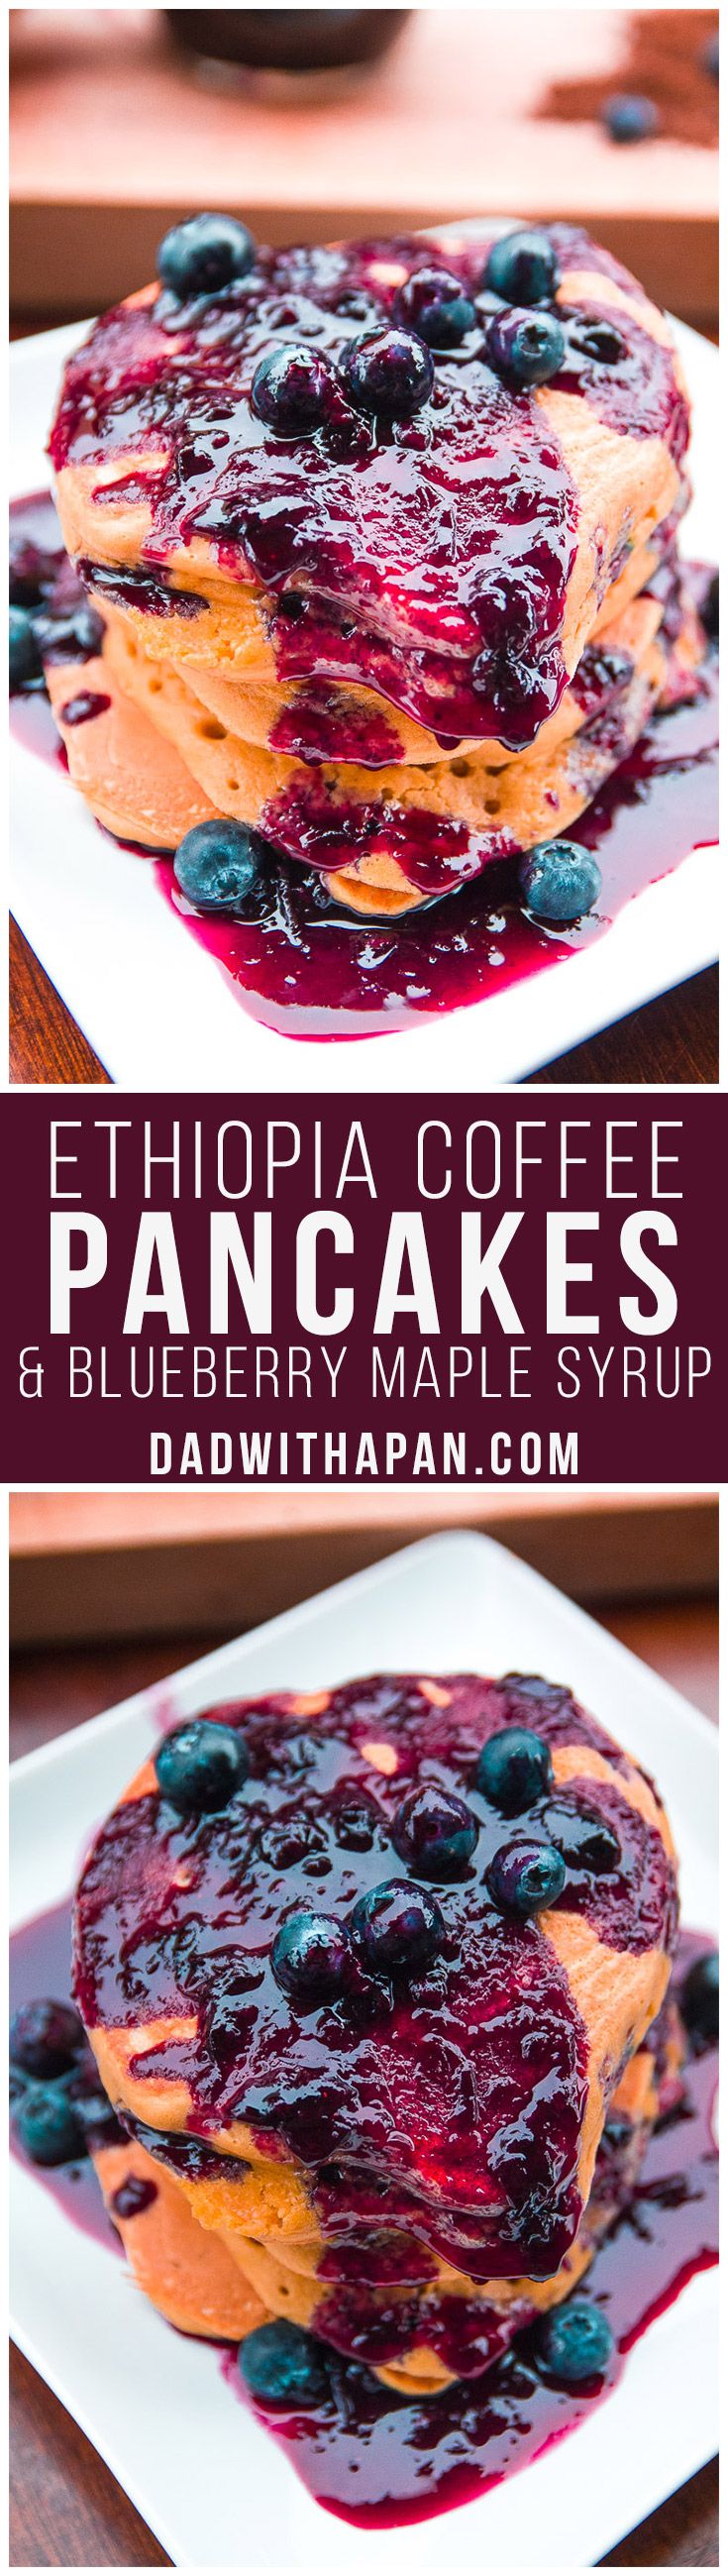 Ethiopia Coffee Pancakes With Blueberry Maple Syrup